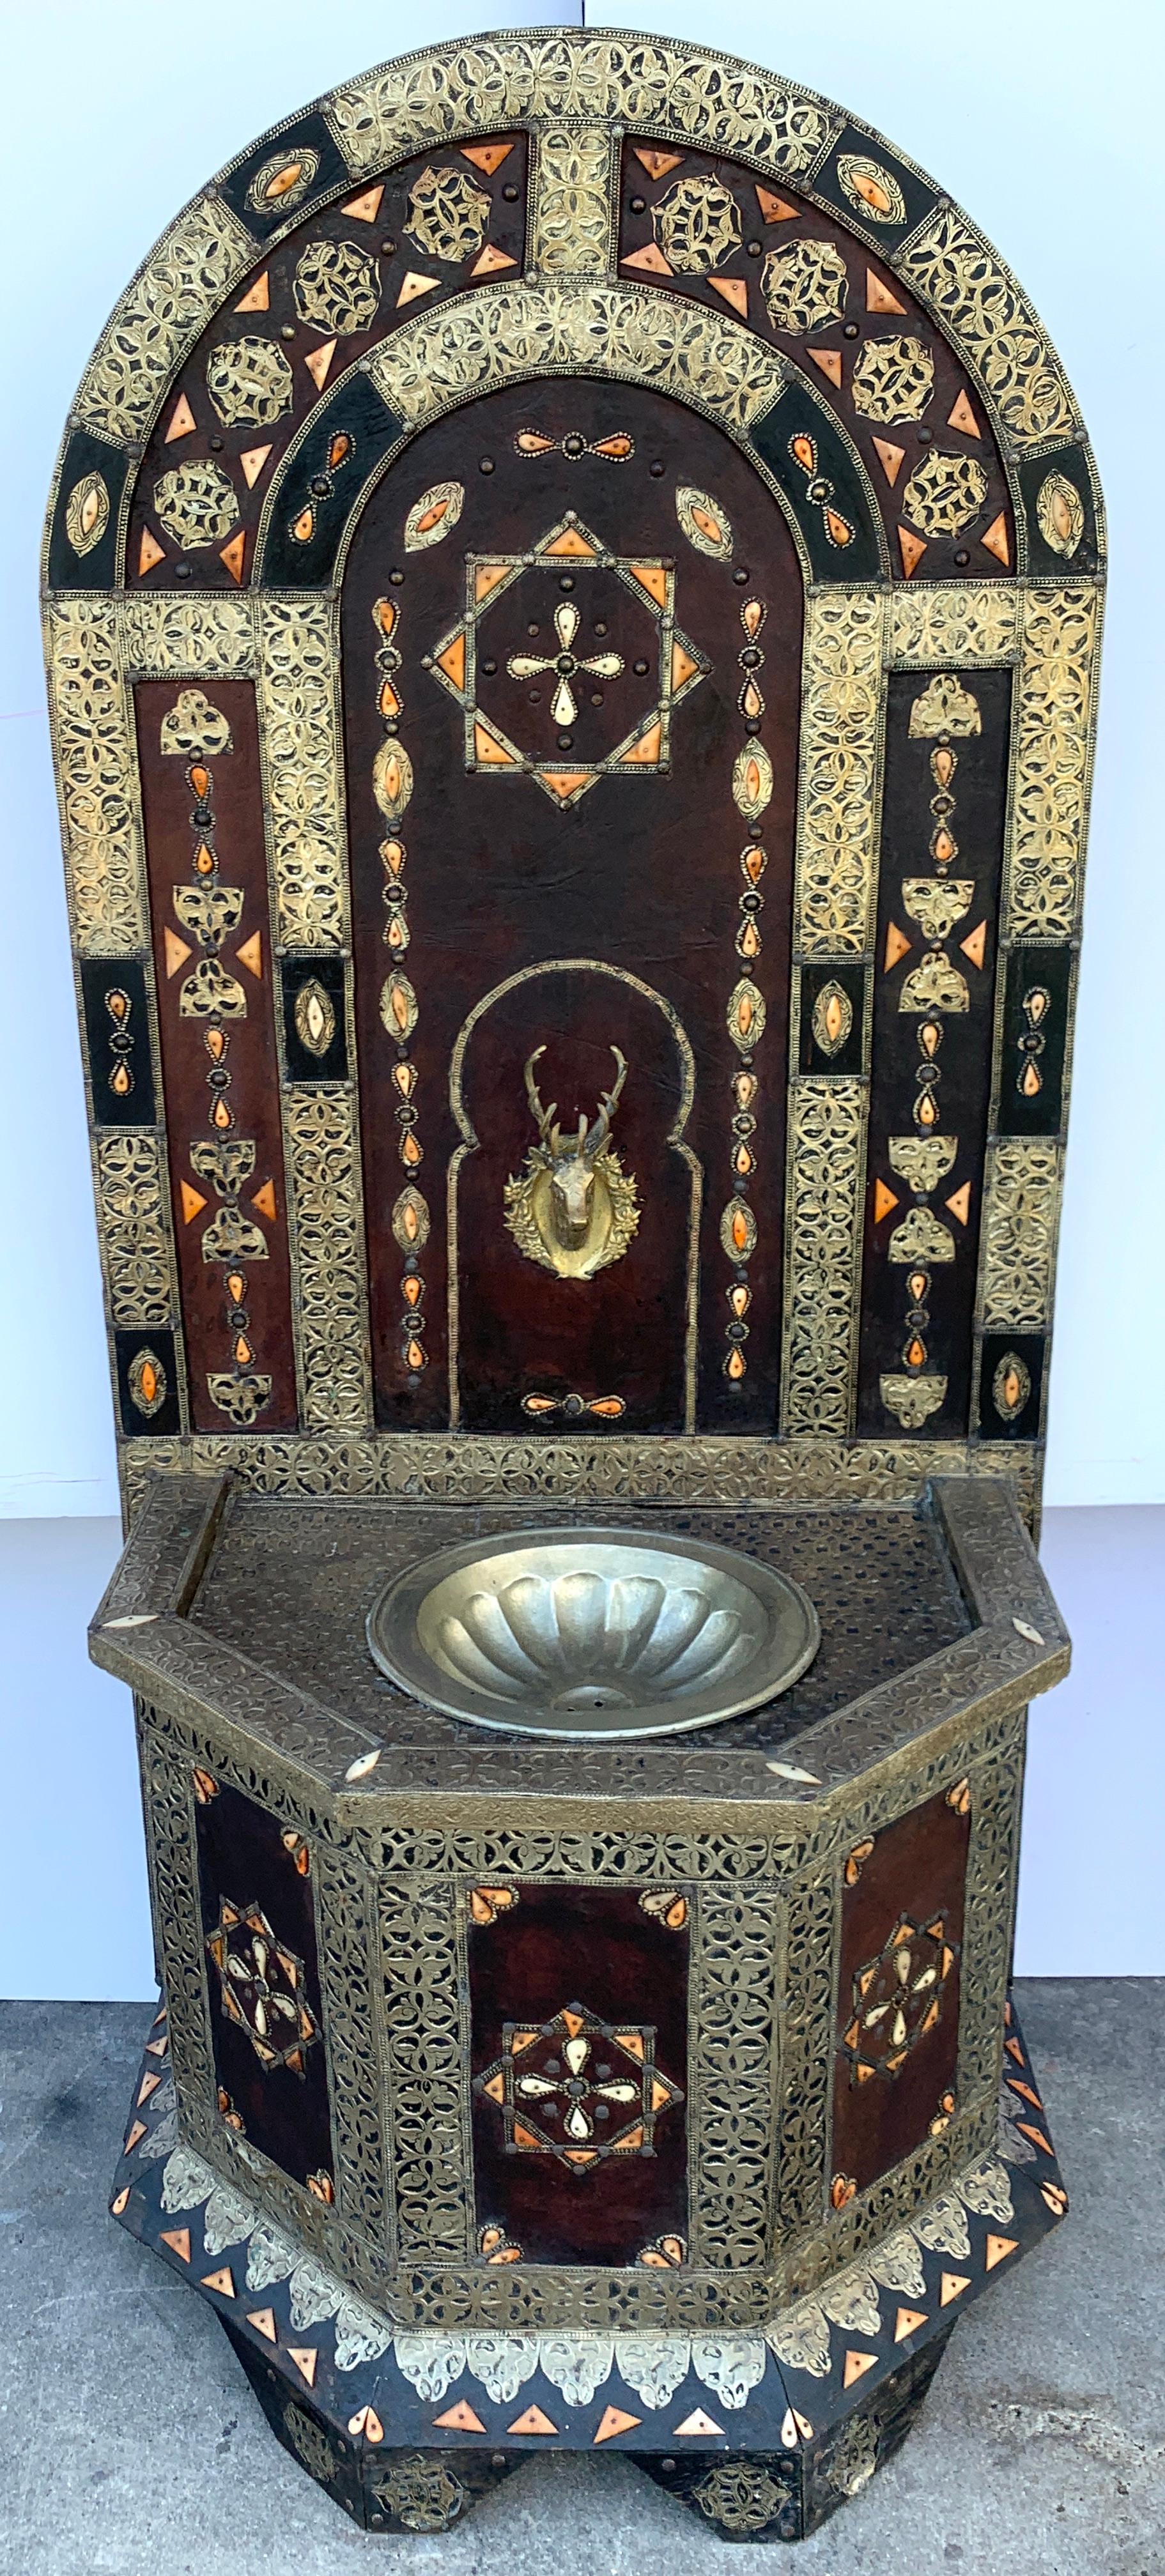 Exotic vintage Moroccan brass, bone, and silvered fountain, standing 6 feet tall the demilune backsplash profusely inlaid and mounted with various decorative elements, with a central brass stag fountain spilling into a 15-Inch diameter ribbed bowl